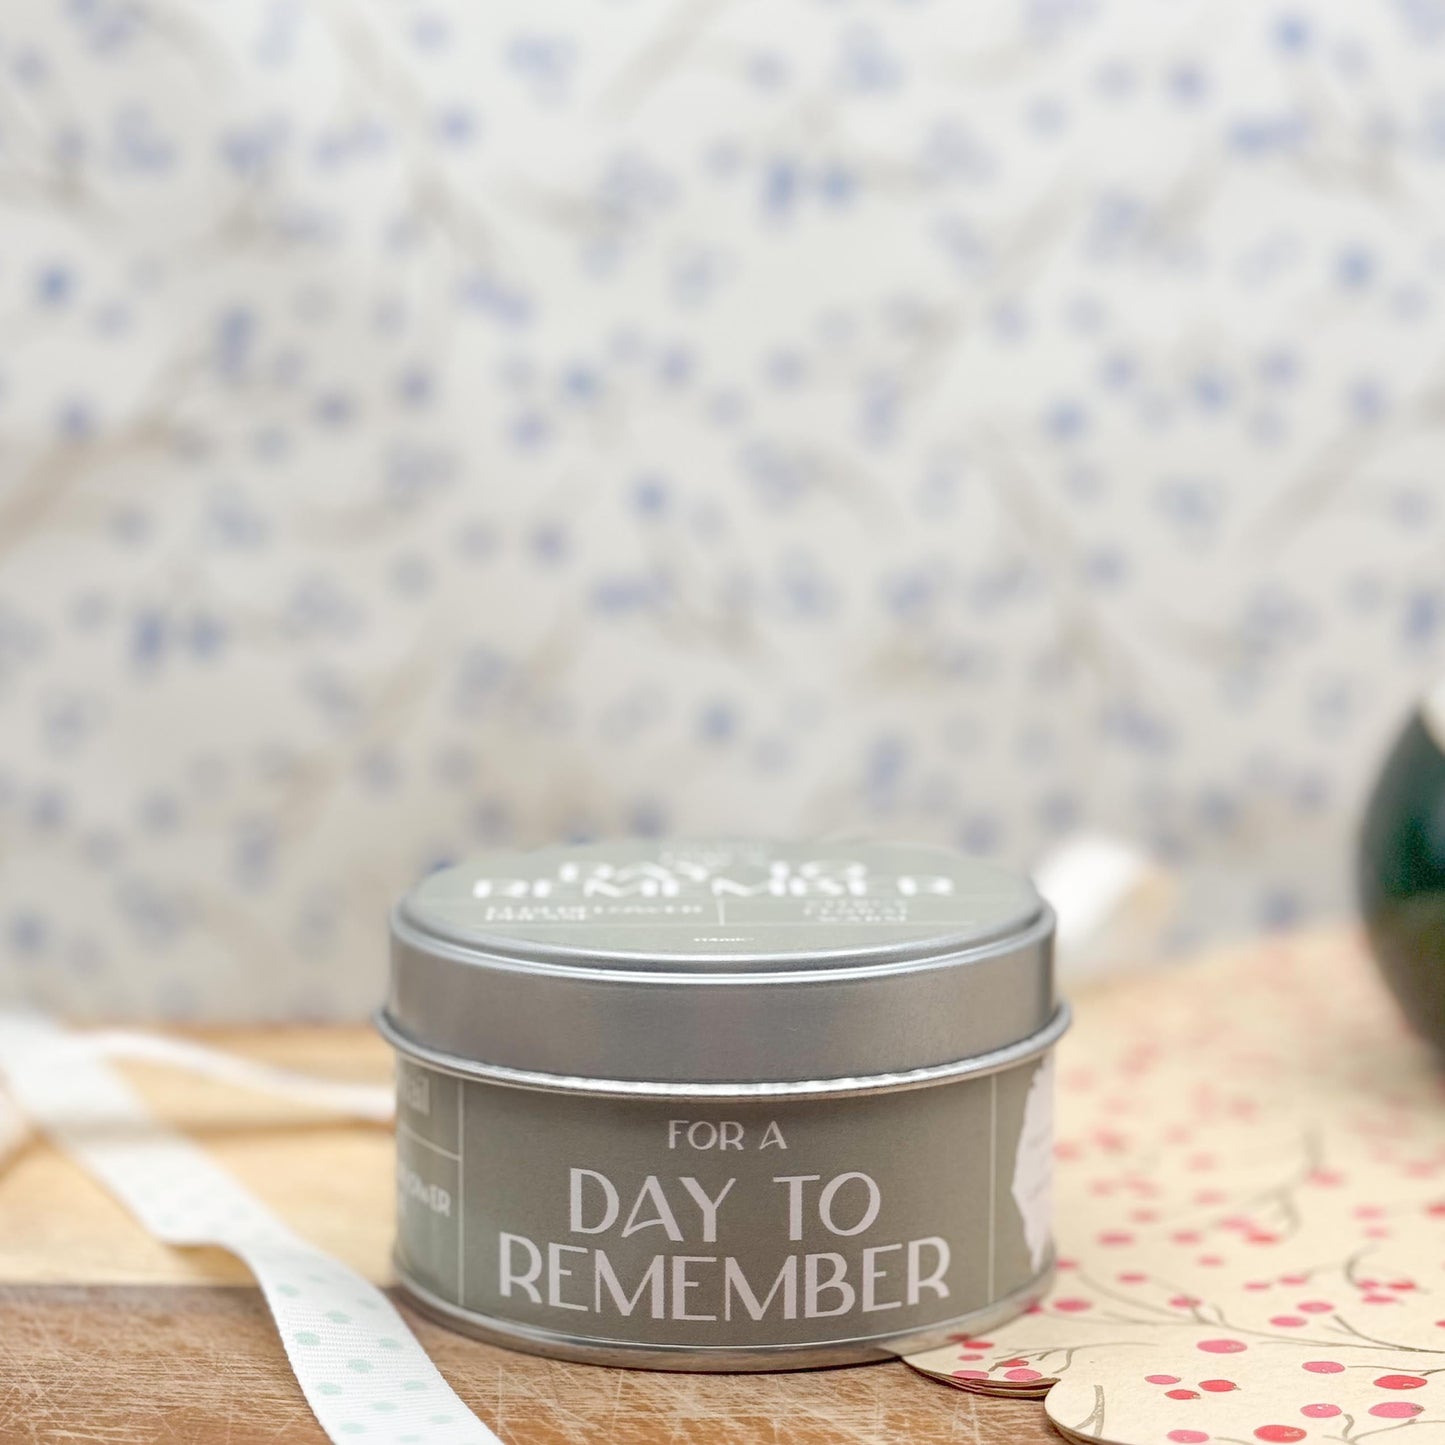 'For a Day to Remember' Elderflower Presse Occasion Candle